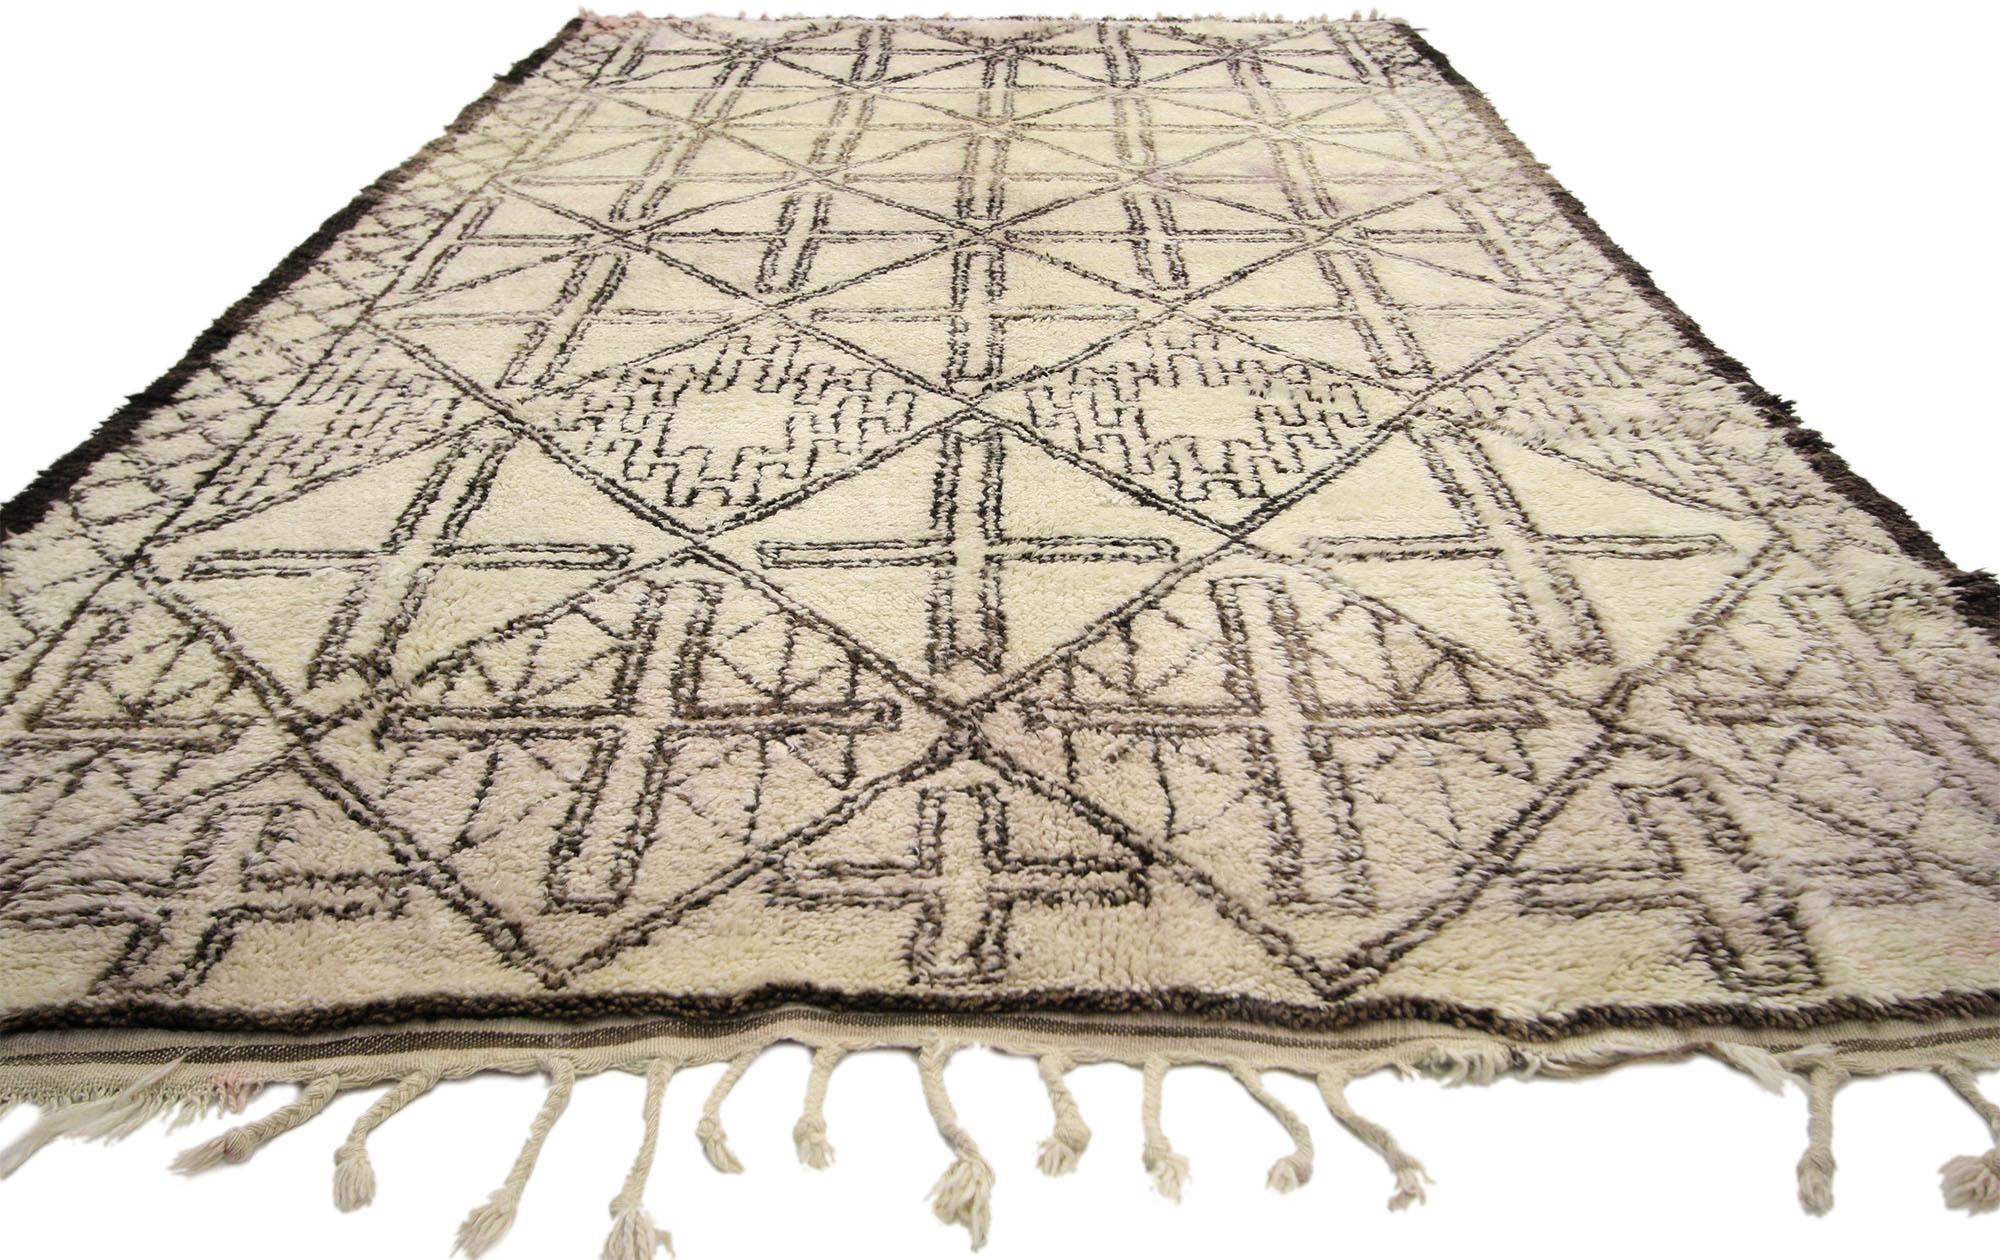 Hand-Knotted Vintage Moroccan Rug with Mid-Century Modern Style, Beni M'Guild Moroccan Rug For Sale